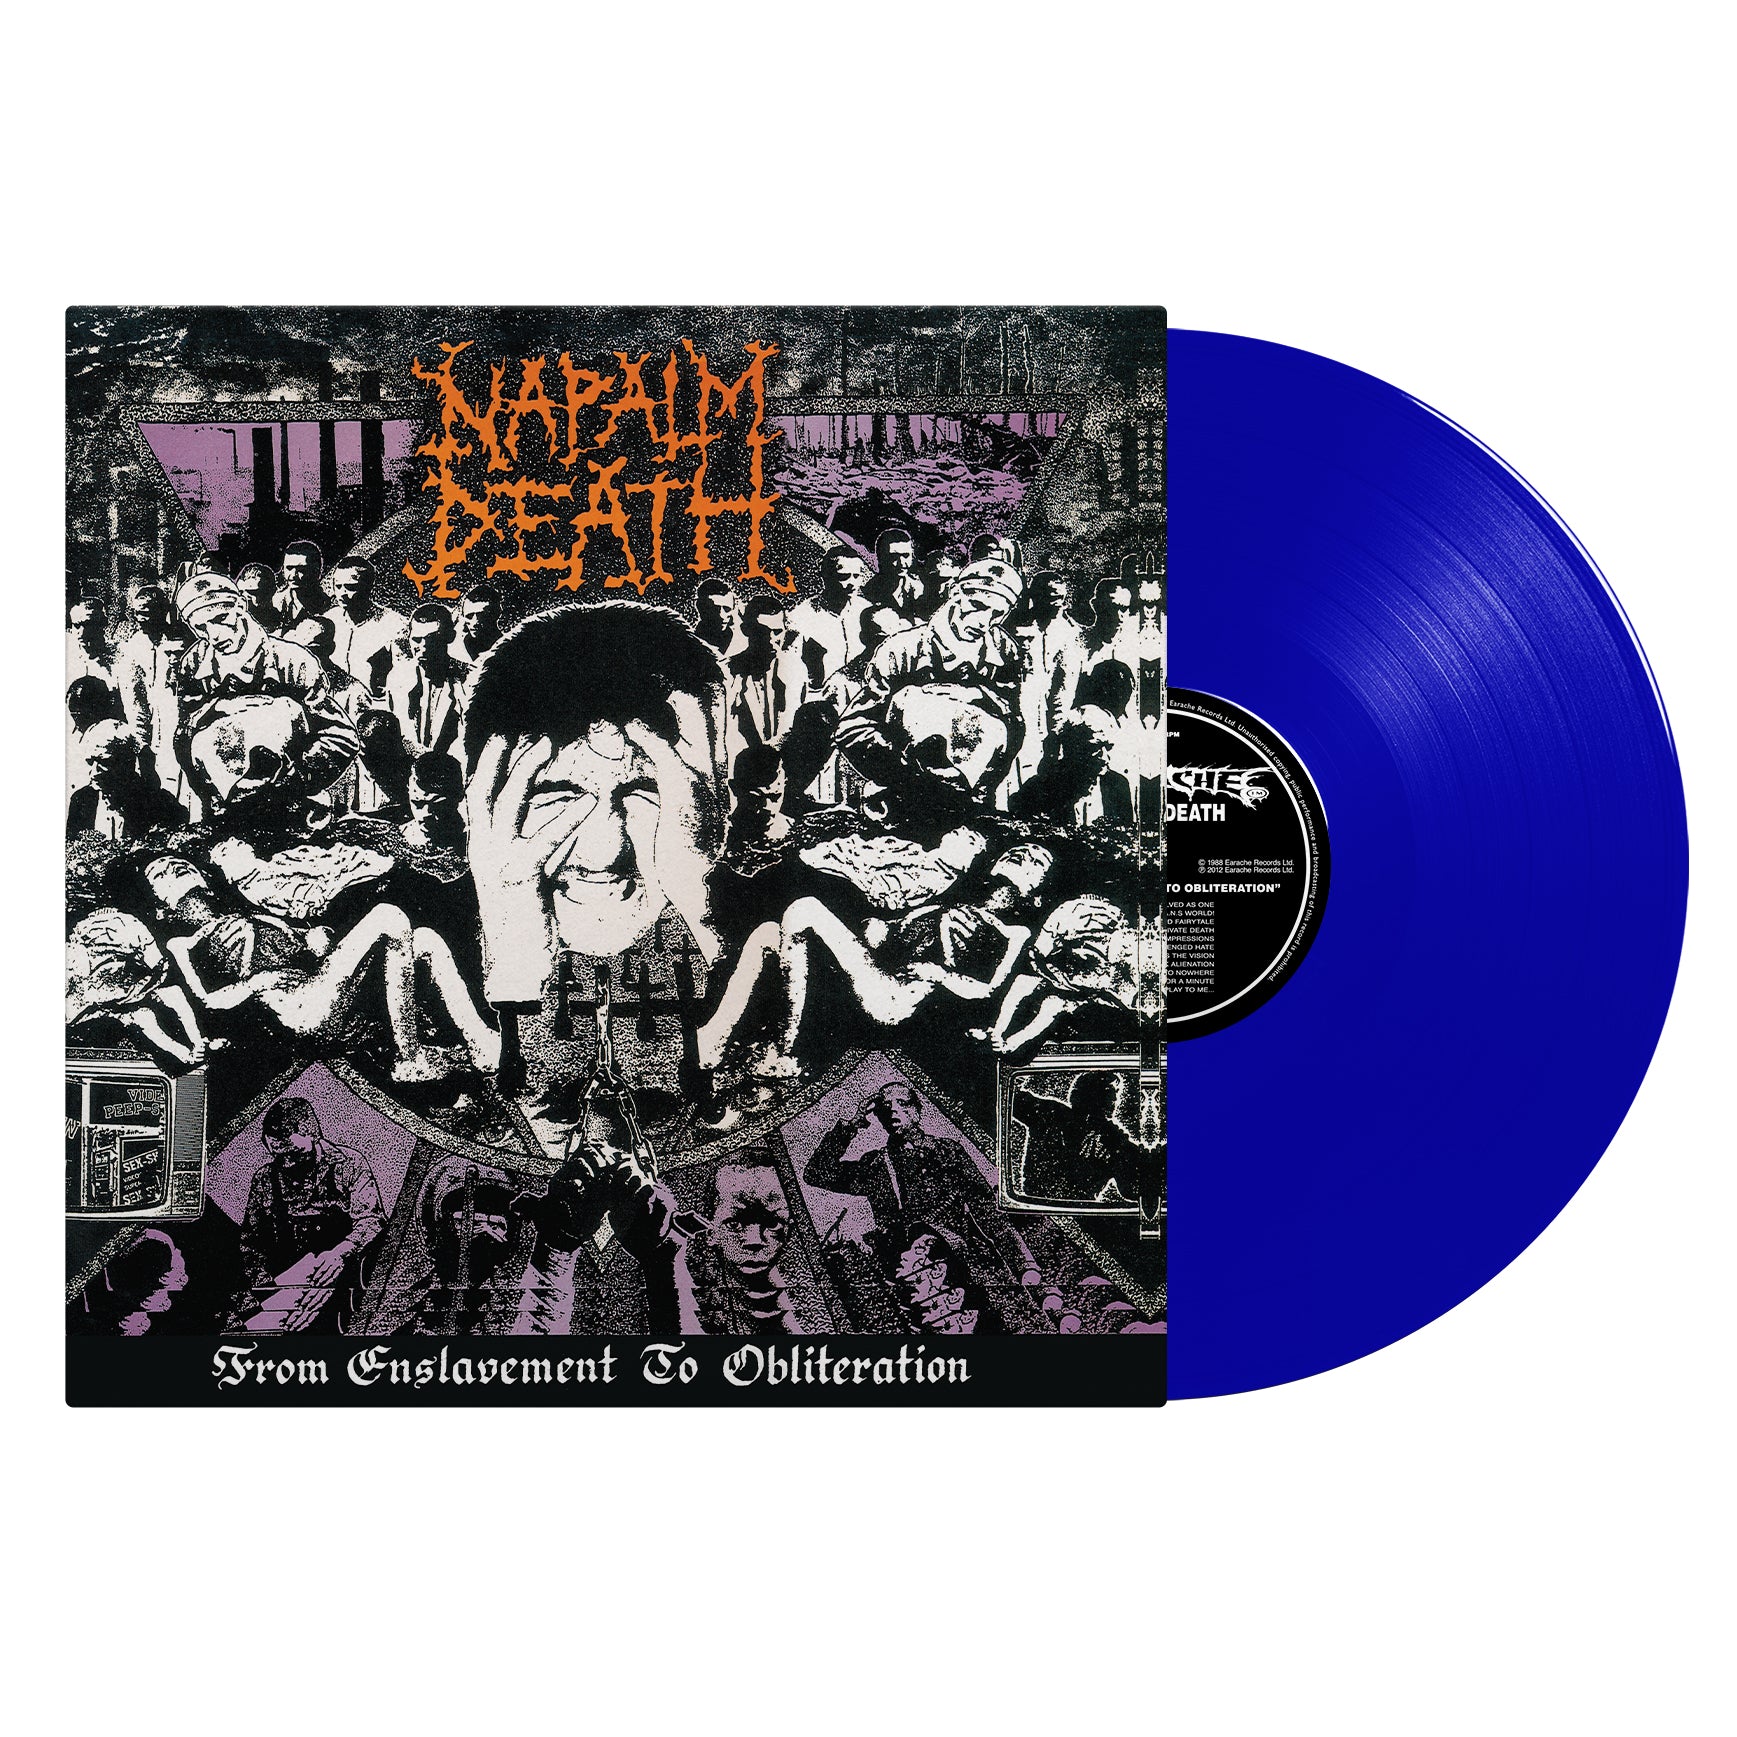 Napalm Death "From Enslavement To Obliteration" FDR Blue Vinyl (Ltd to 300 Copies)